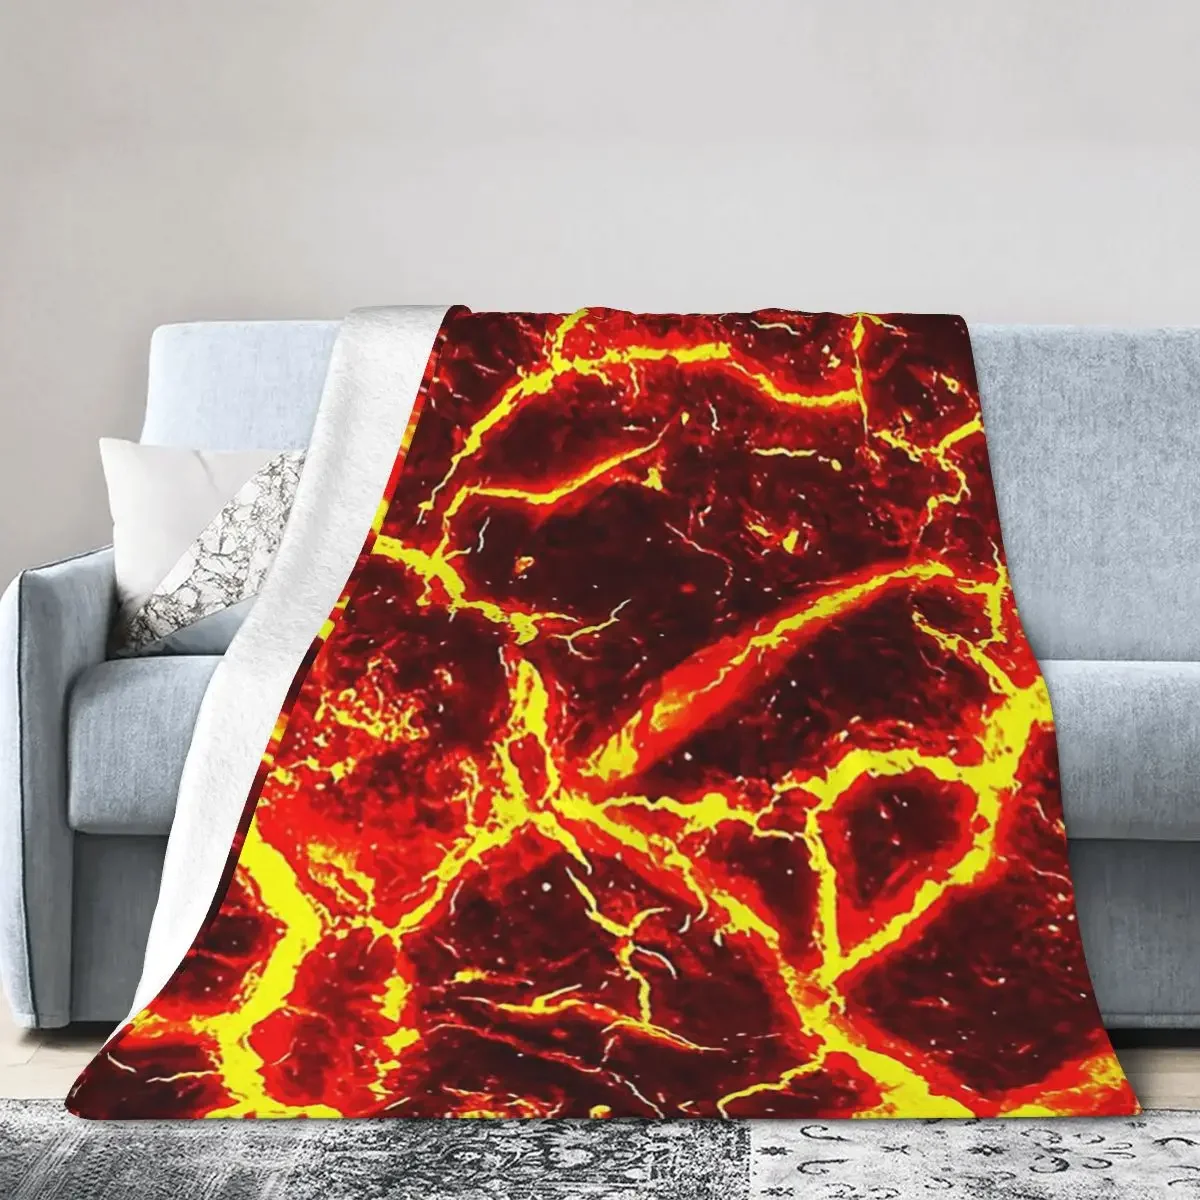 

Lava Blankets Soft Warm Flannel Throw Blanket Cover for Bed Living room Picnic Travel Home Couch